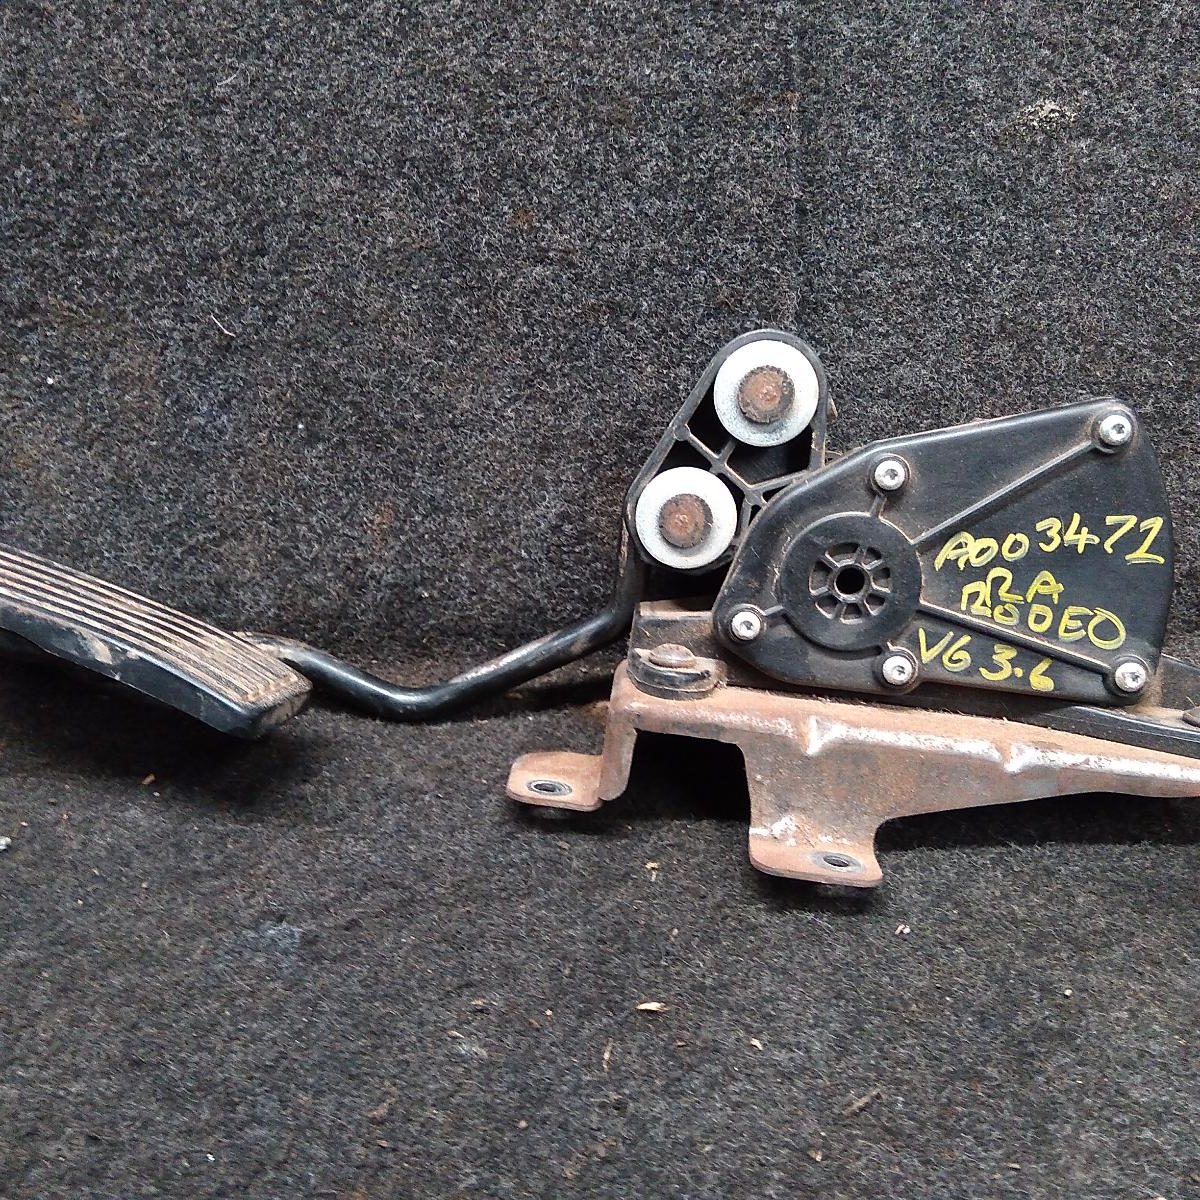 2006 HOLDEN RODEO PEDAL ASSEMBLY